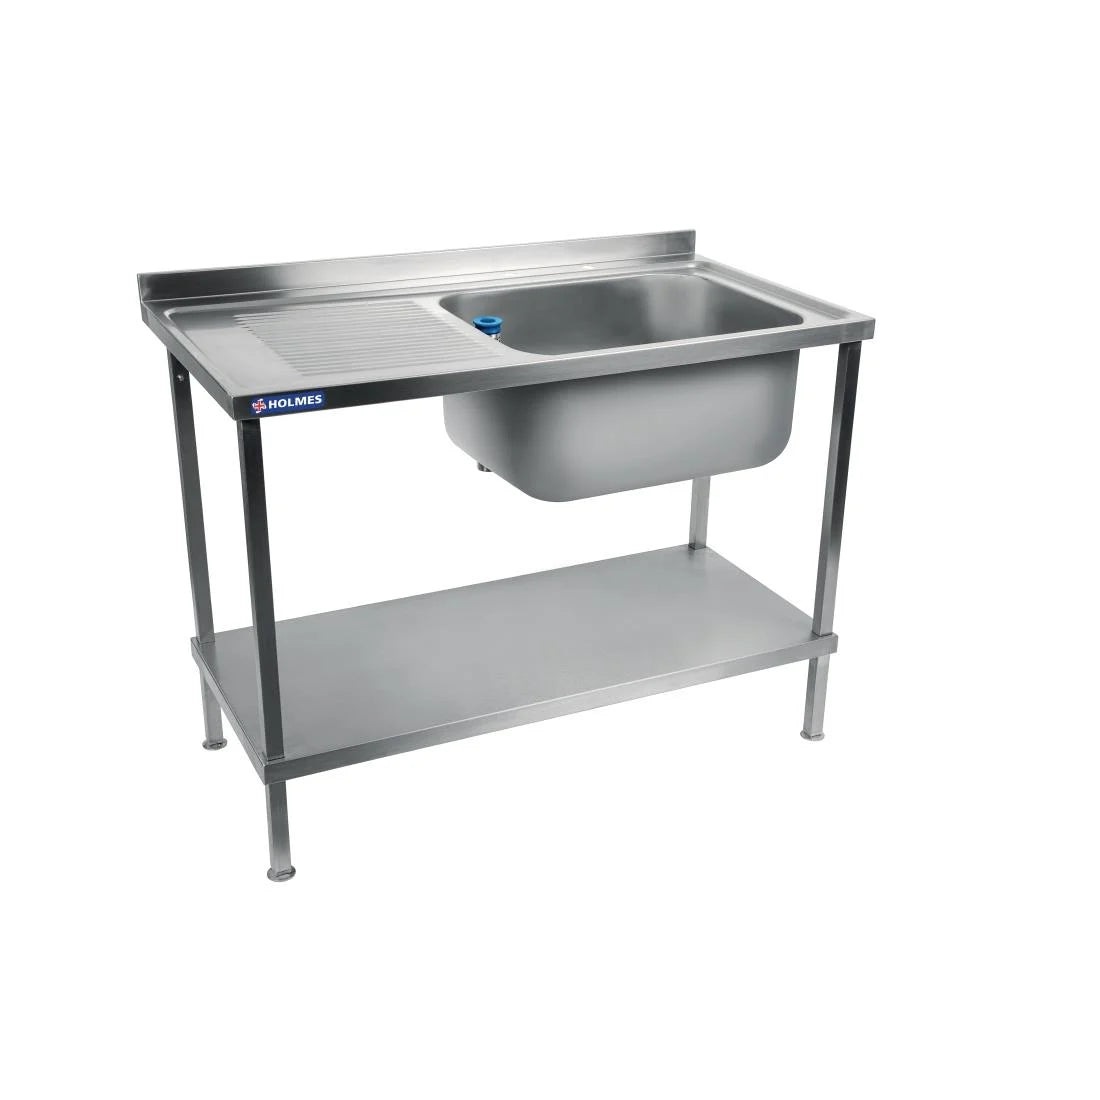 DR383 Holmes Fully Assembled Stainless Steel Sink Left Hand Drainer 1200mm JD Catering Equipment Solutions Ltd